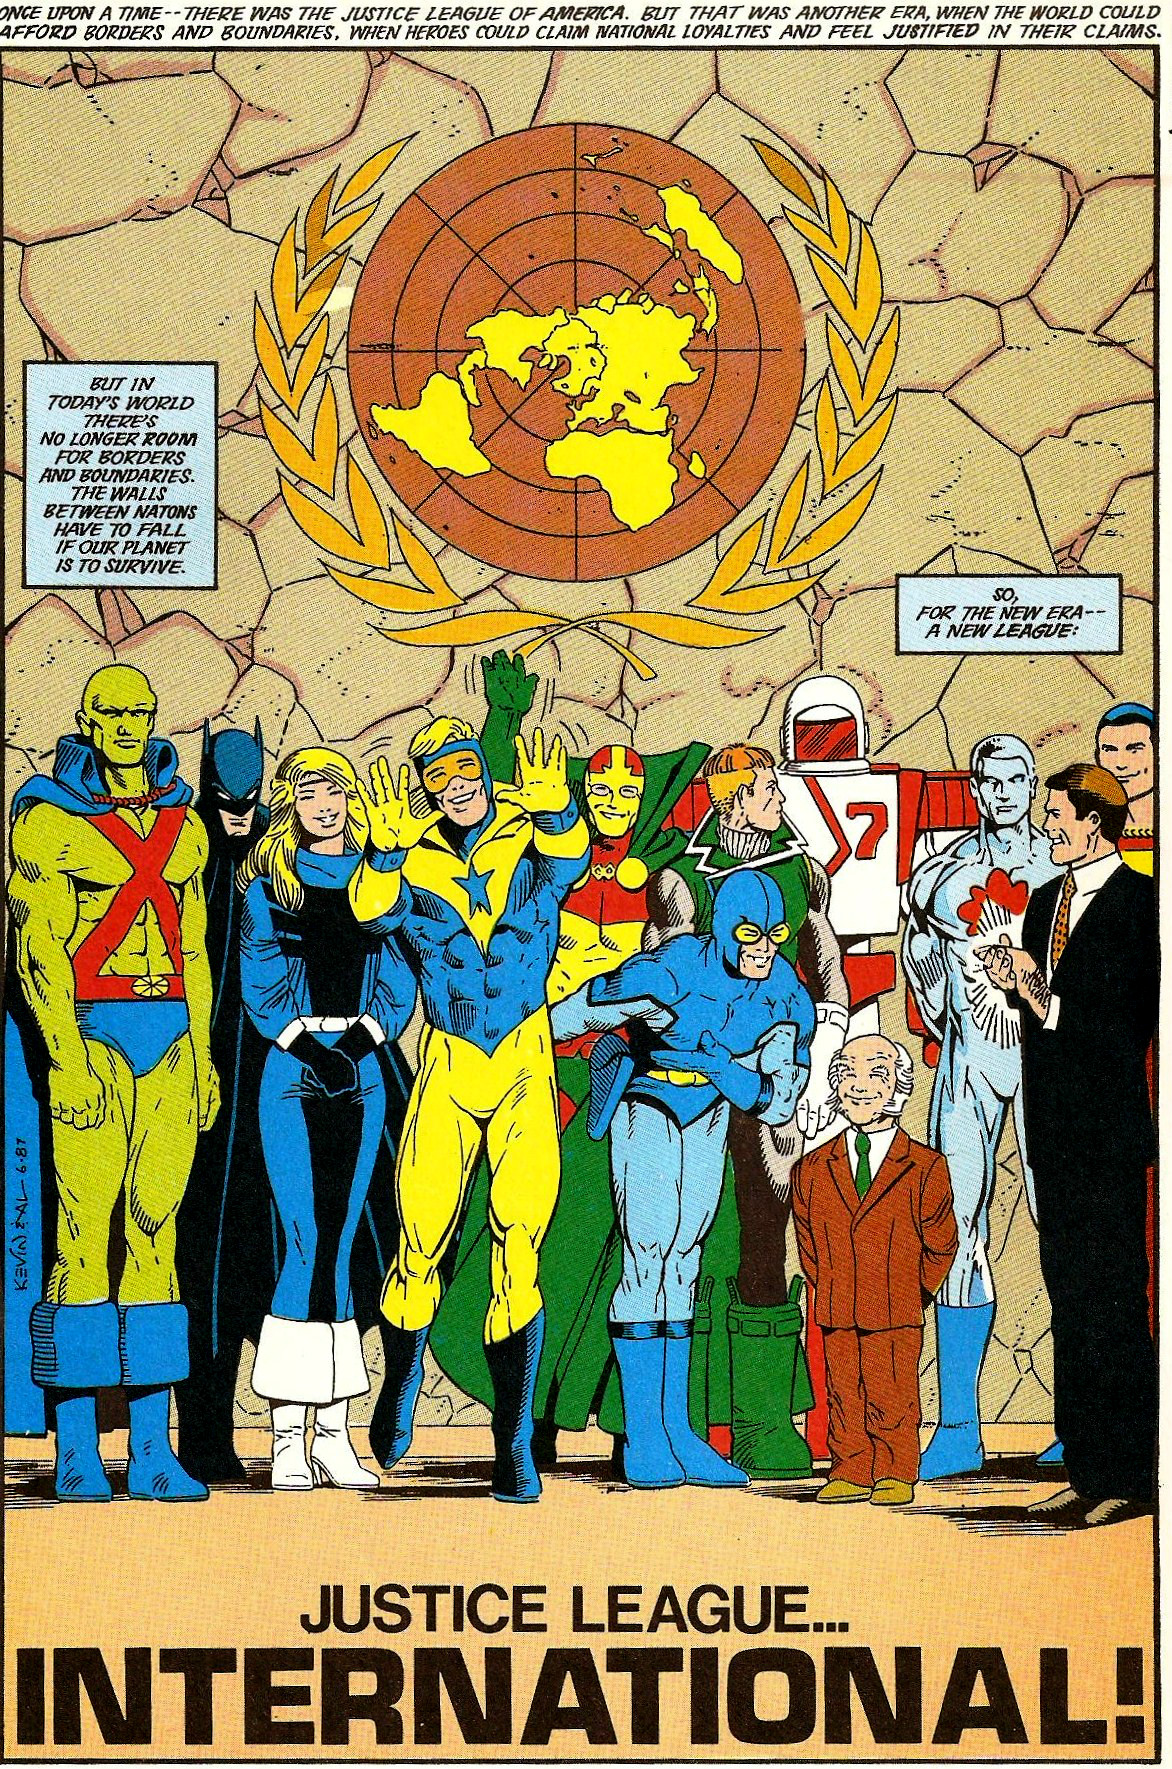 From Justice League International (Vol. 1) #7 (1987)